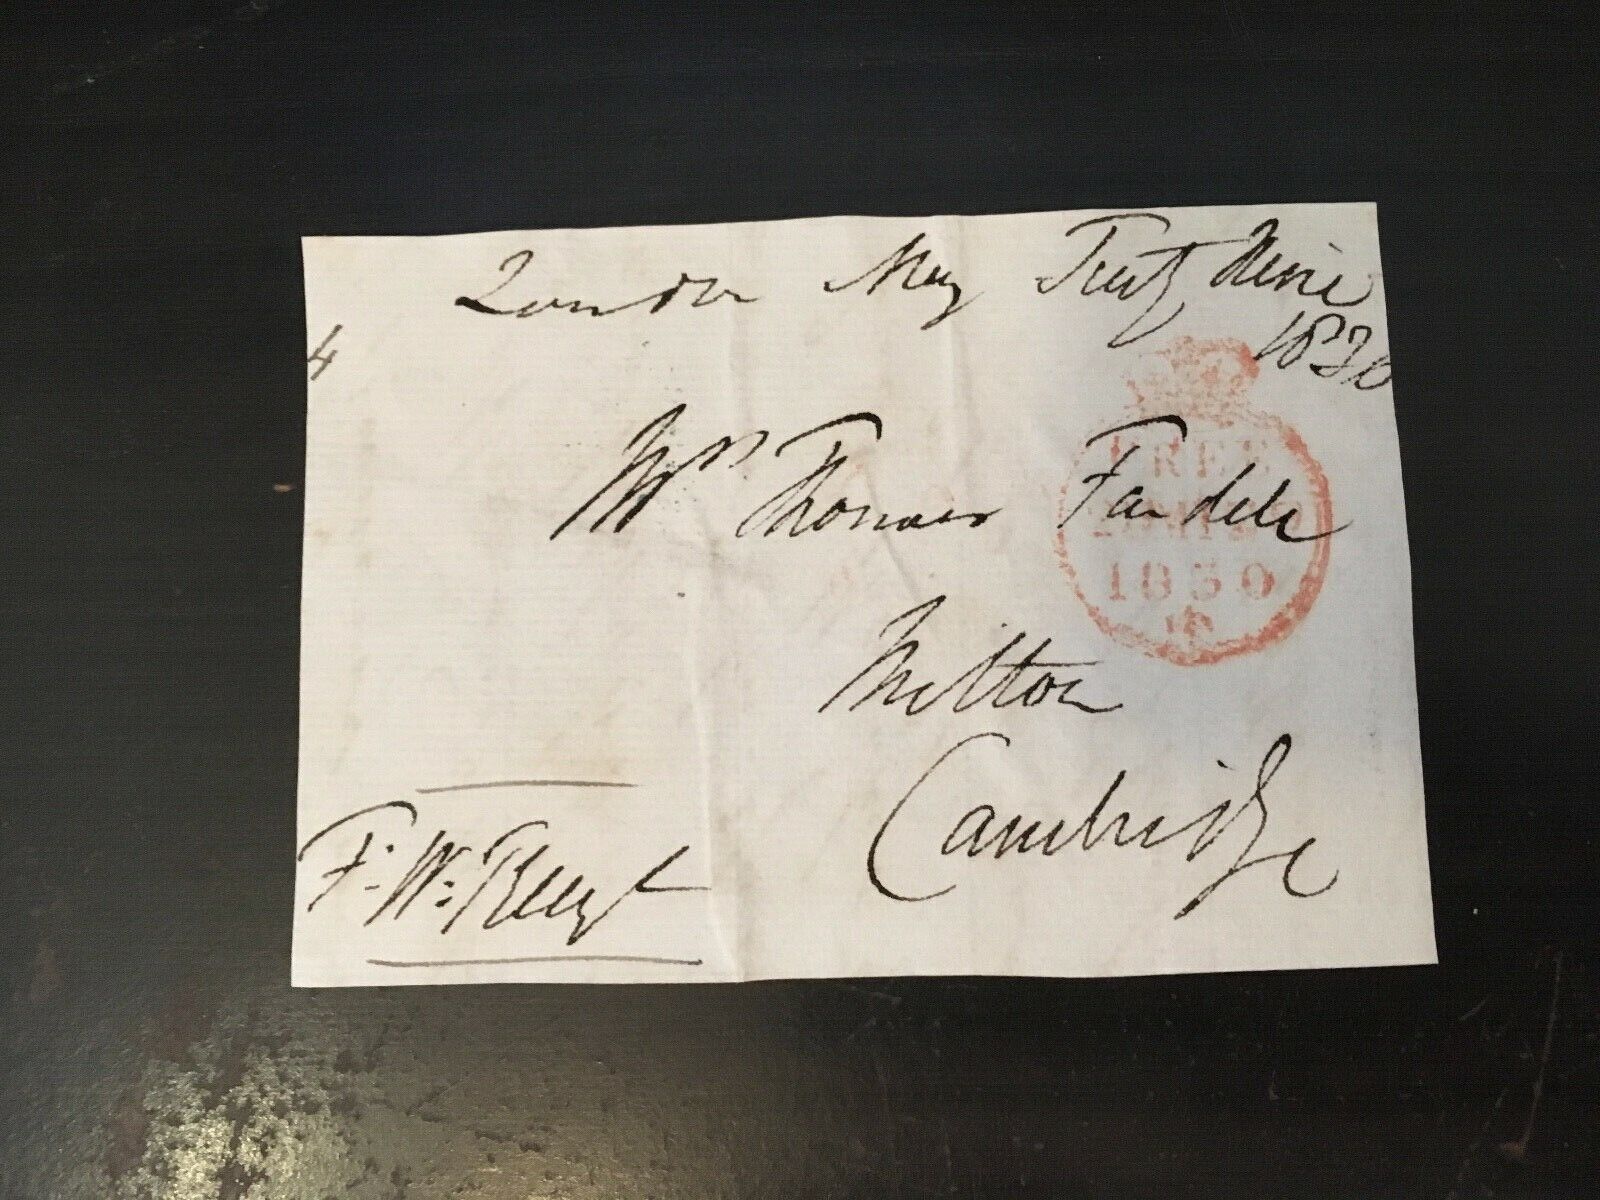 FREDERICK WILLIAM TRENCH - DISTINGUISHED ARMY OFFICER - SIGNED ENVELOPE FRONT